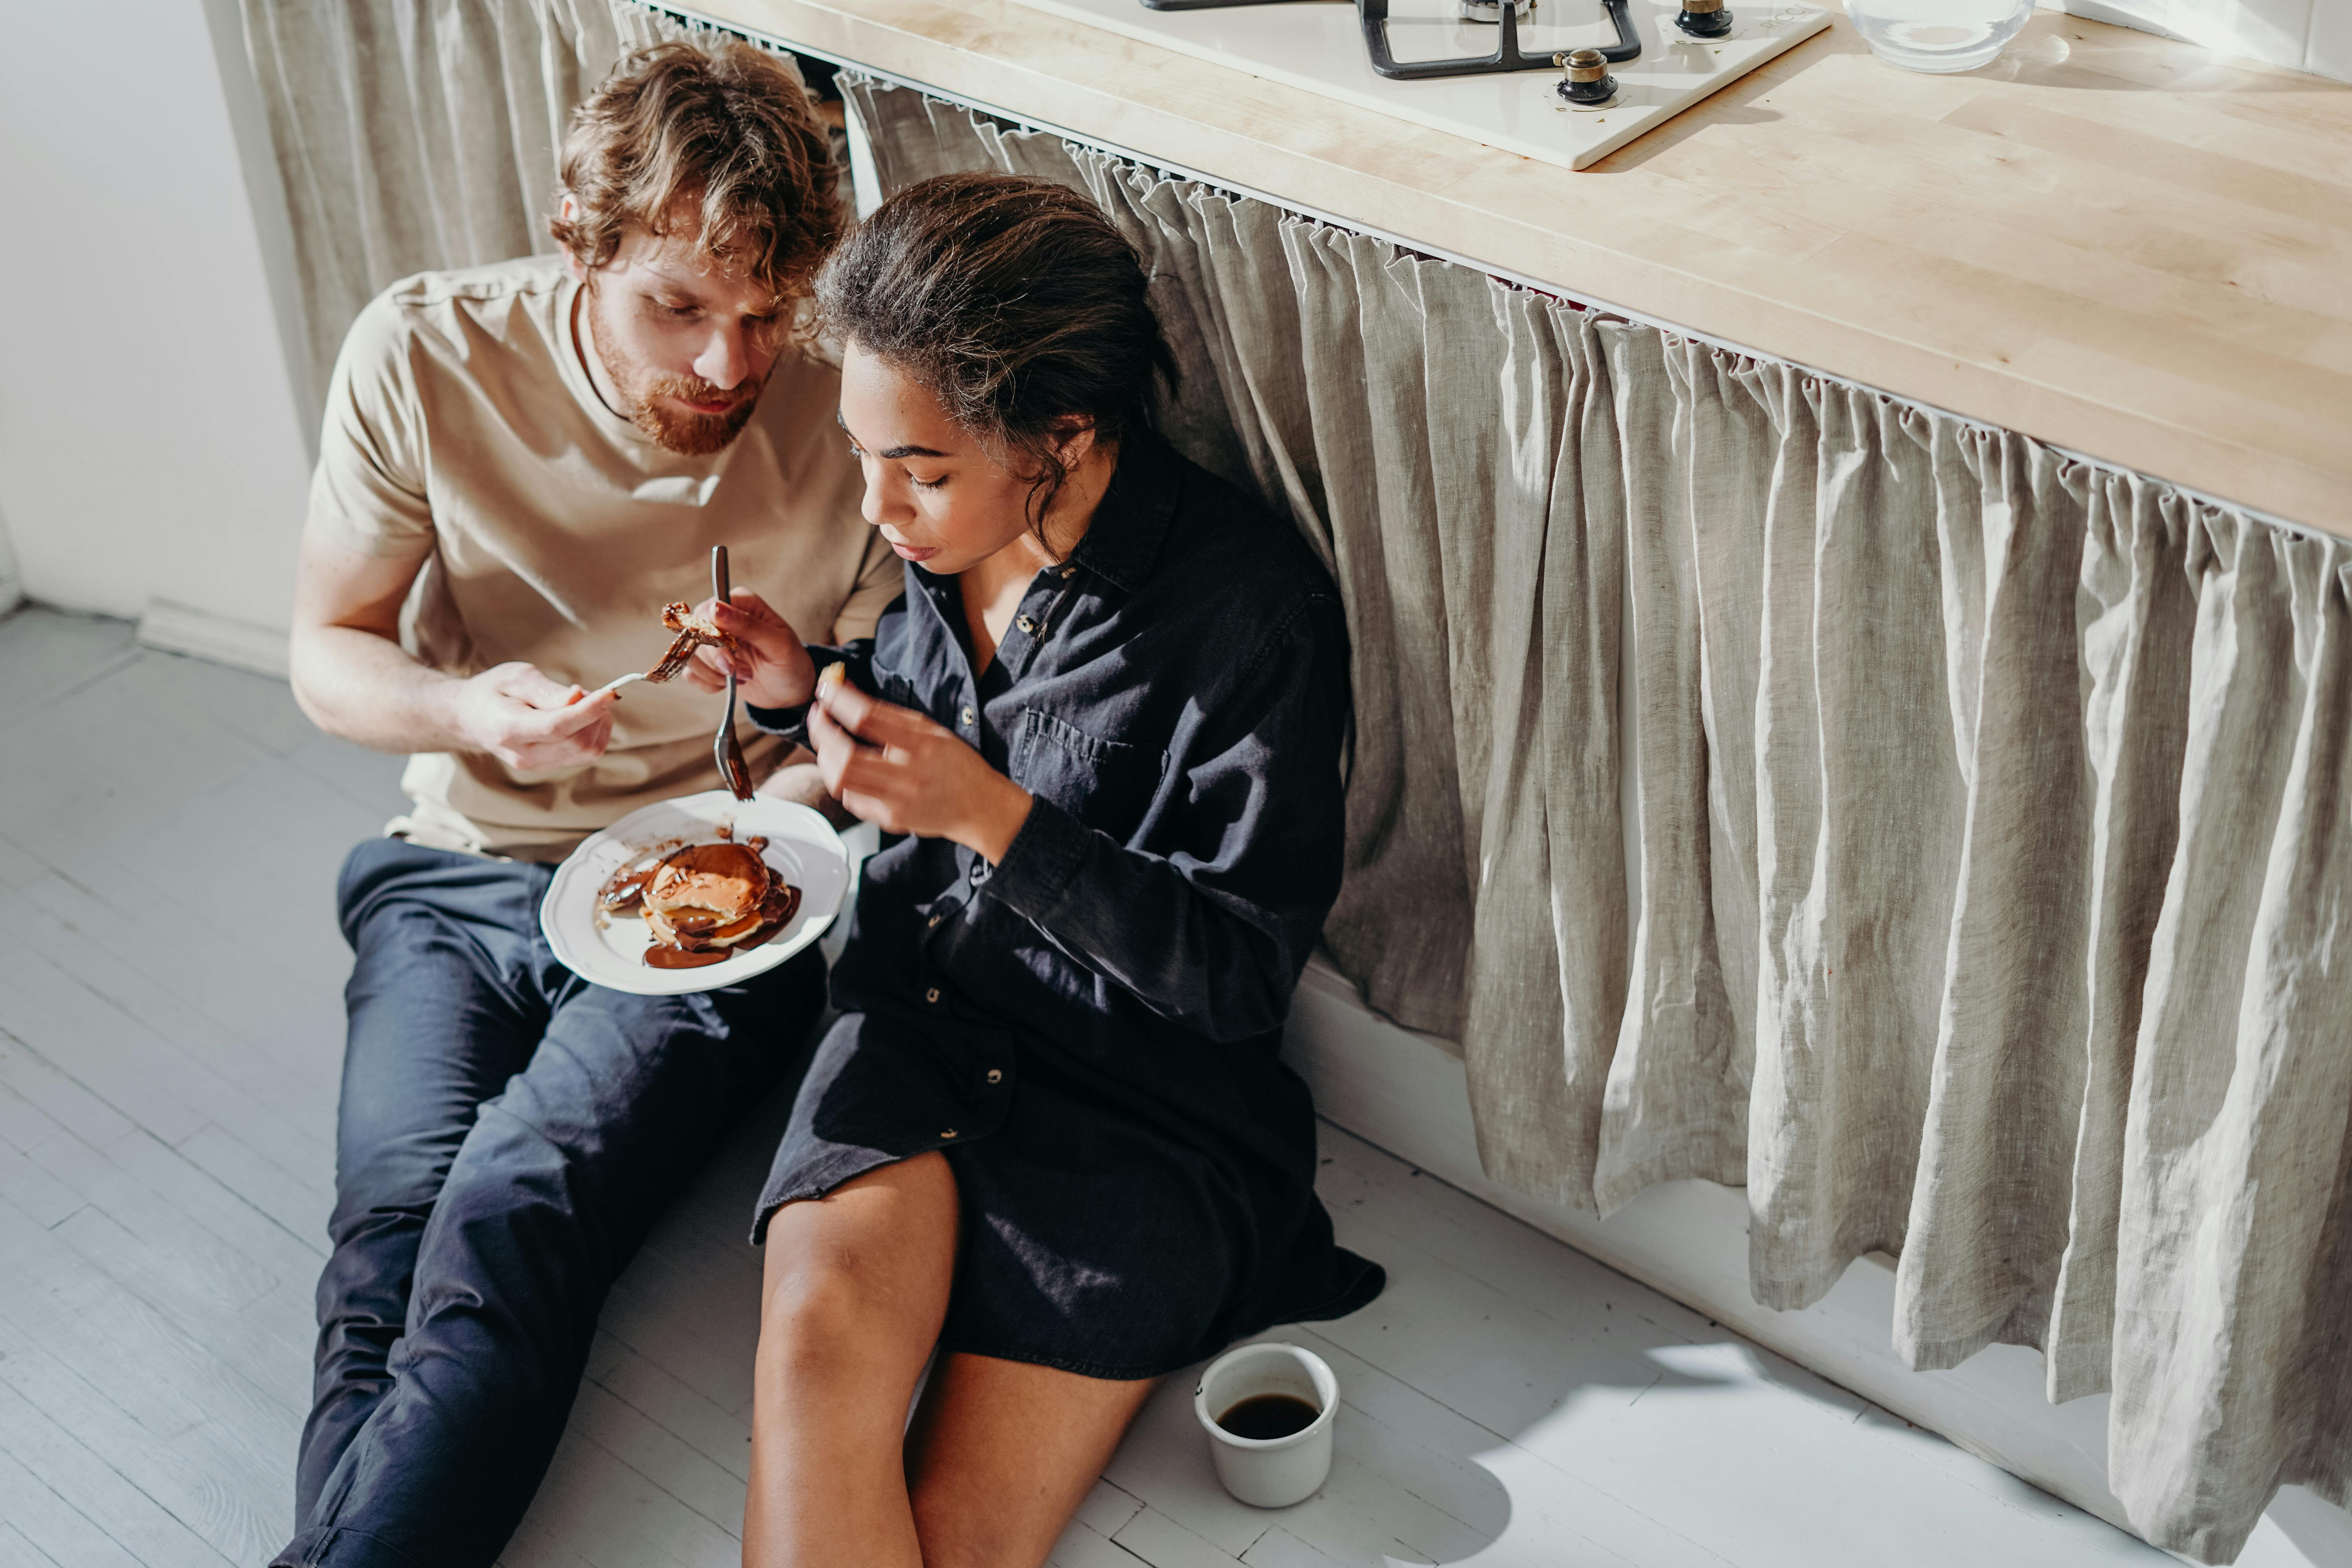 Man and woman eating under the kitchen table. | Photo: Pexels